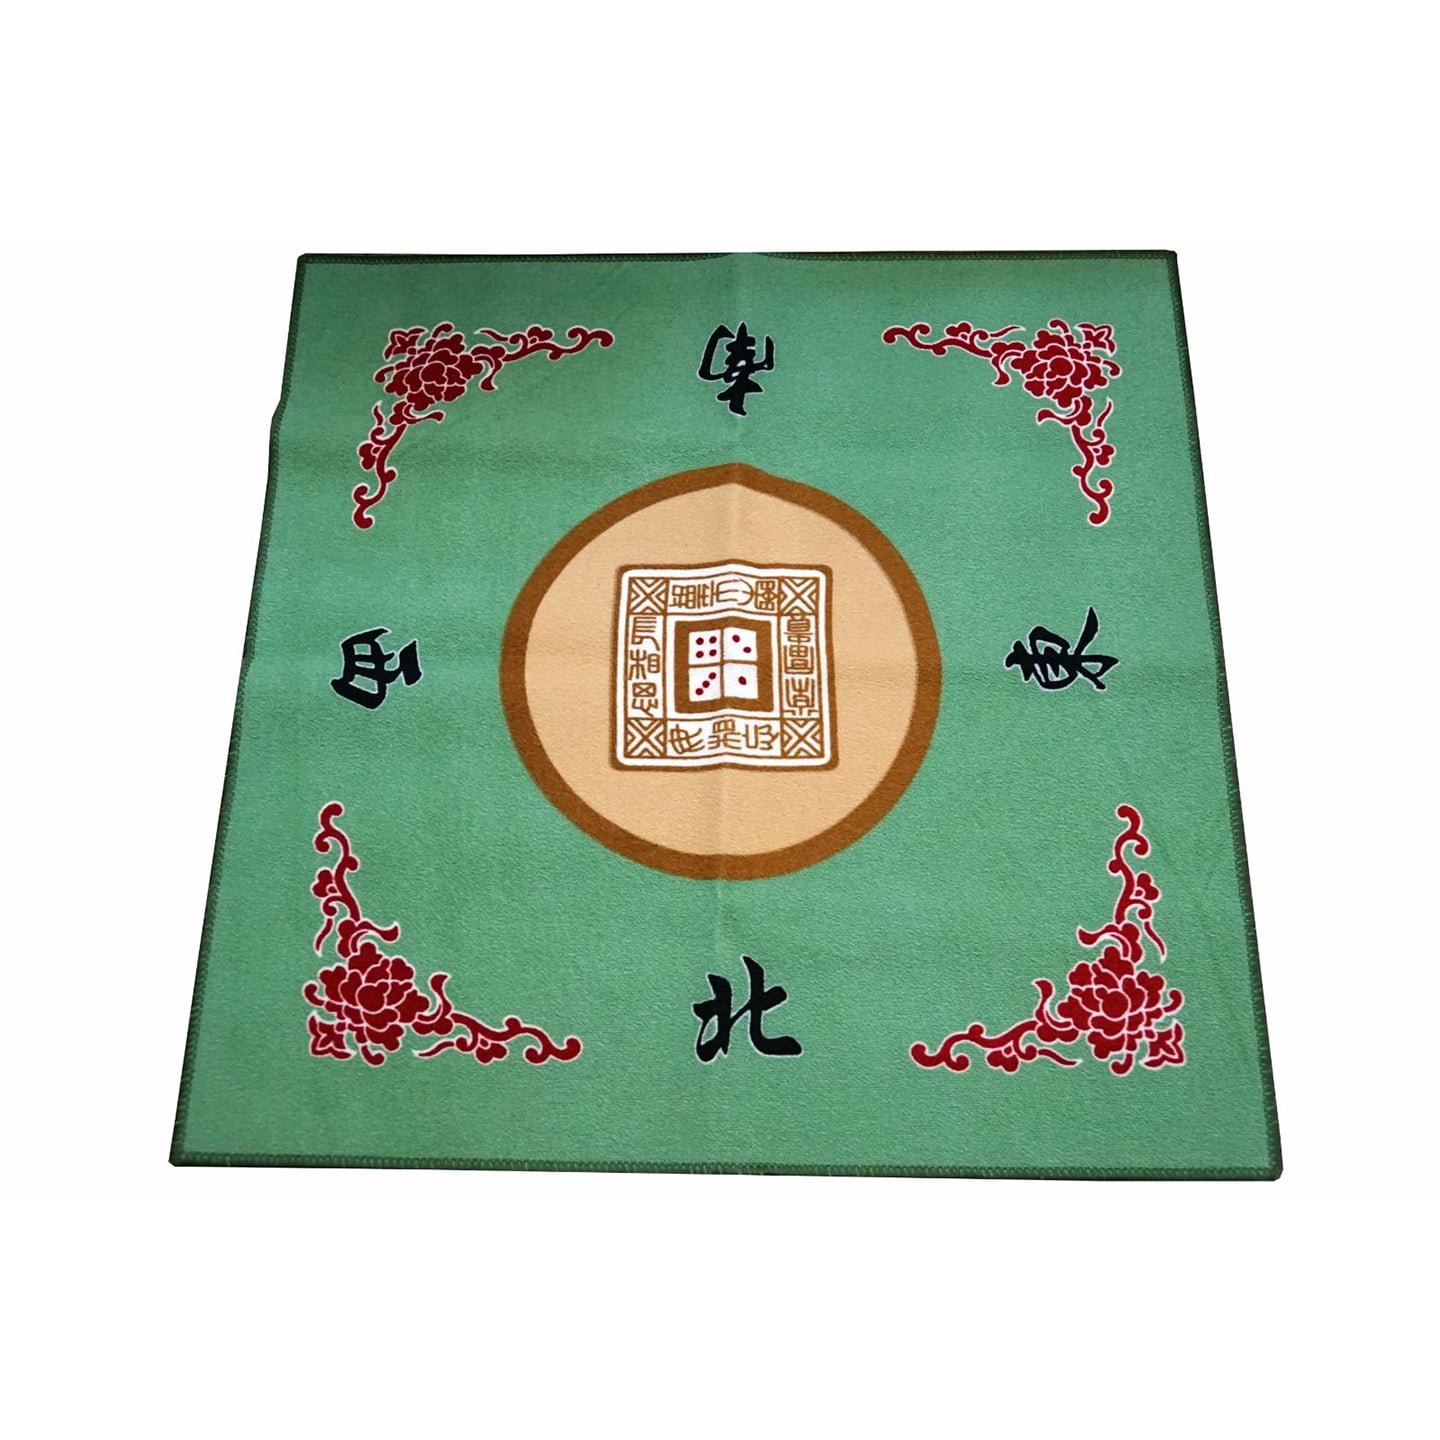 39×39 in Mahjong Poker Mat Pad Table Card Game Cloth Cover Reduce Noise Blanket 